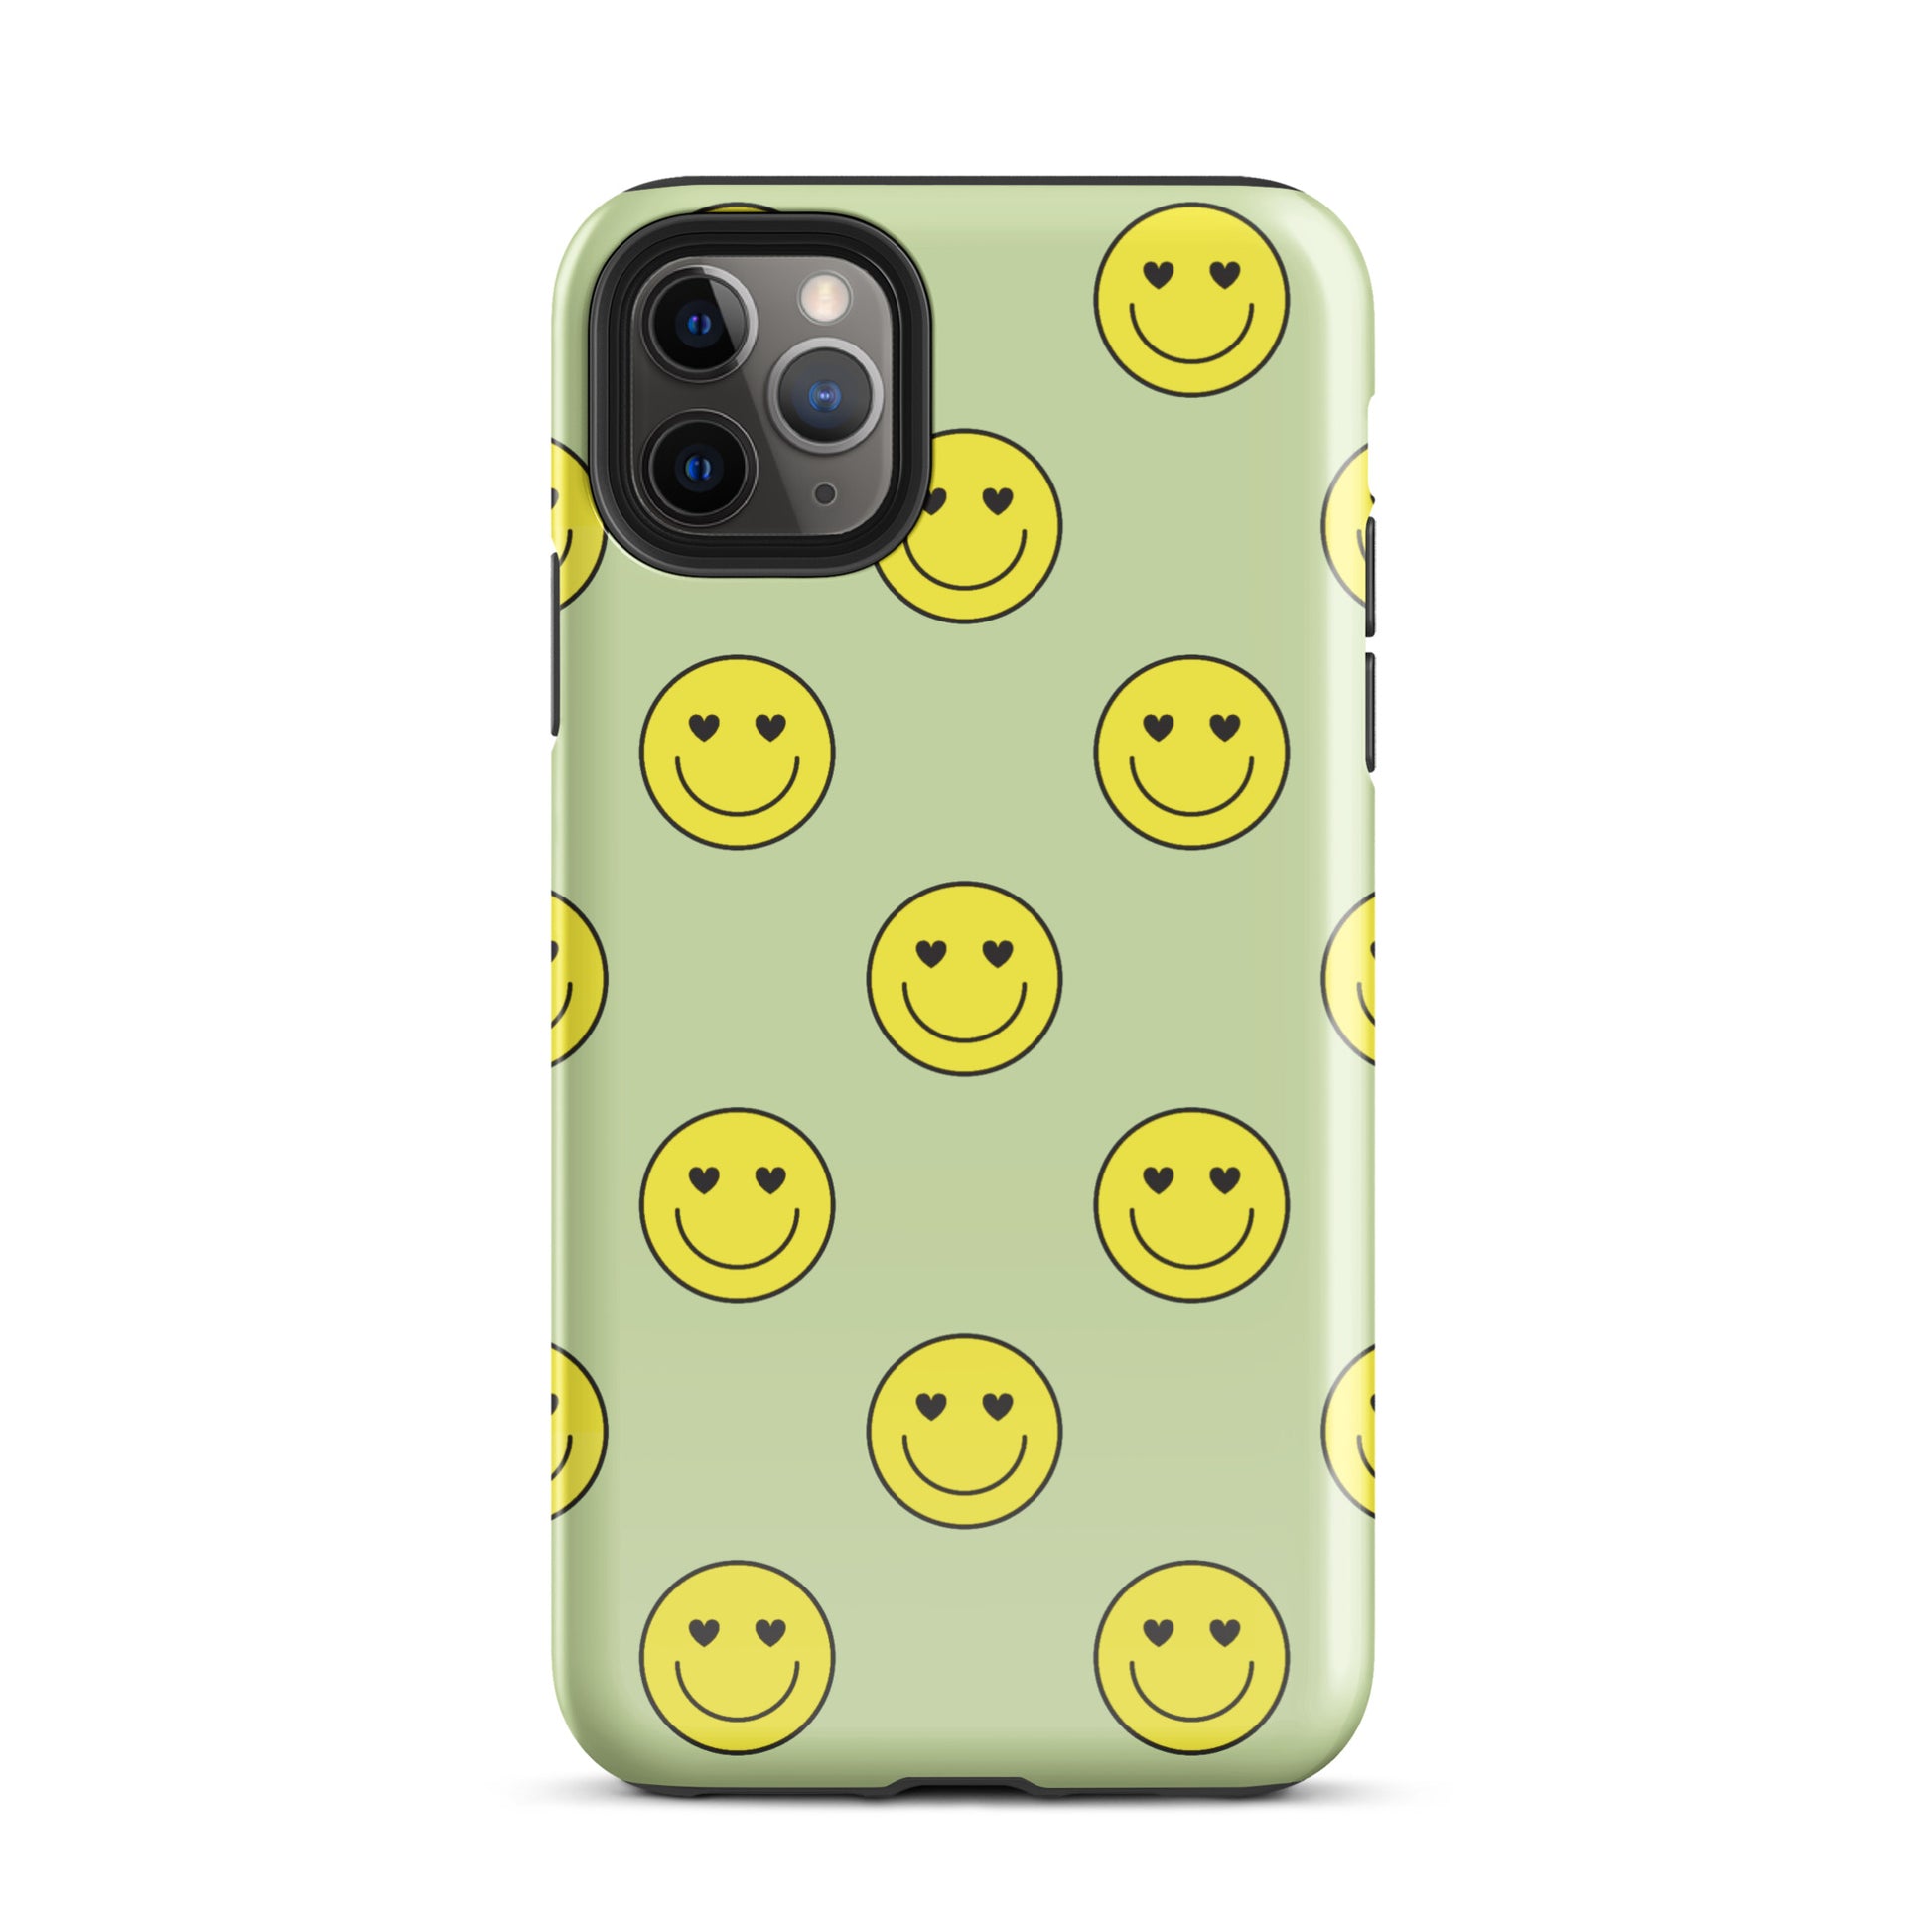 Neon Smiley Faces iPhone Case iPhone 11 Pro Max Glossy